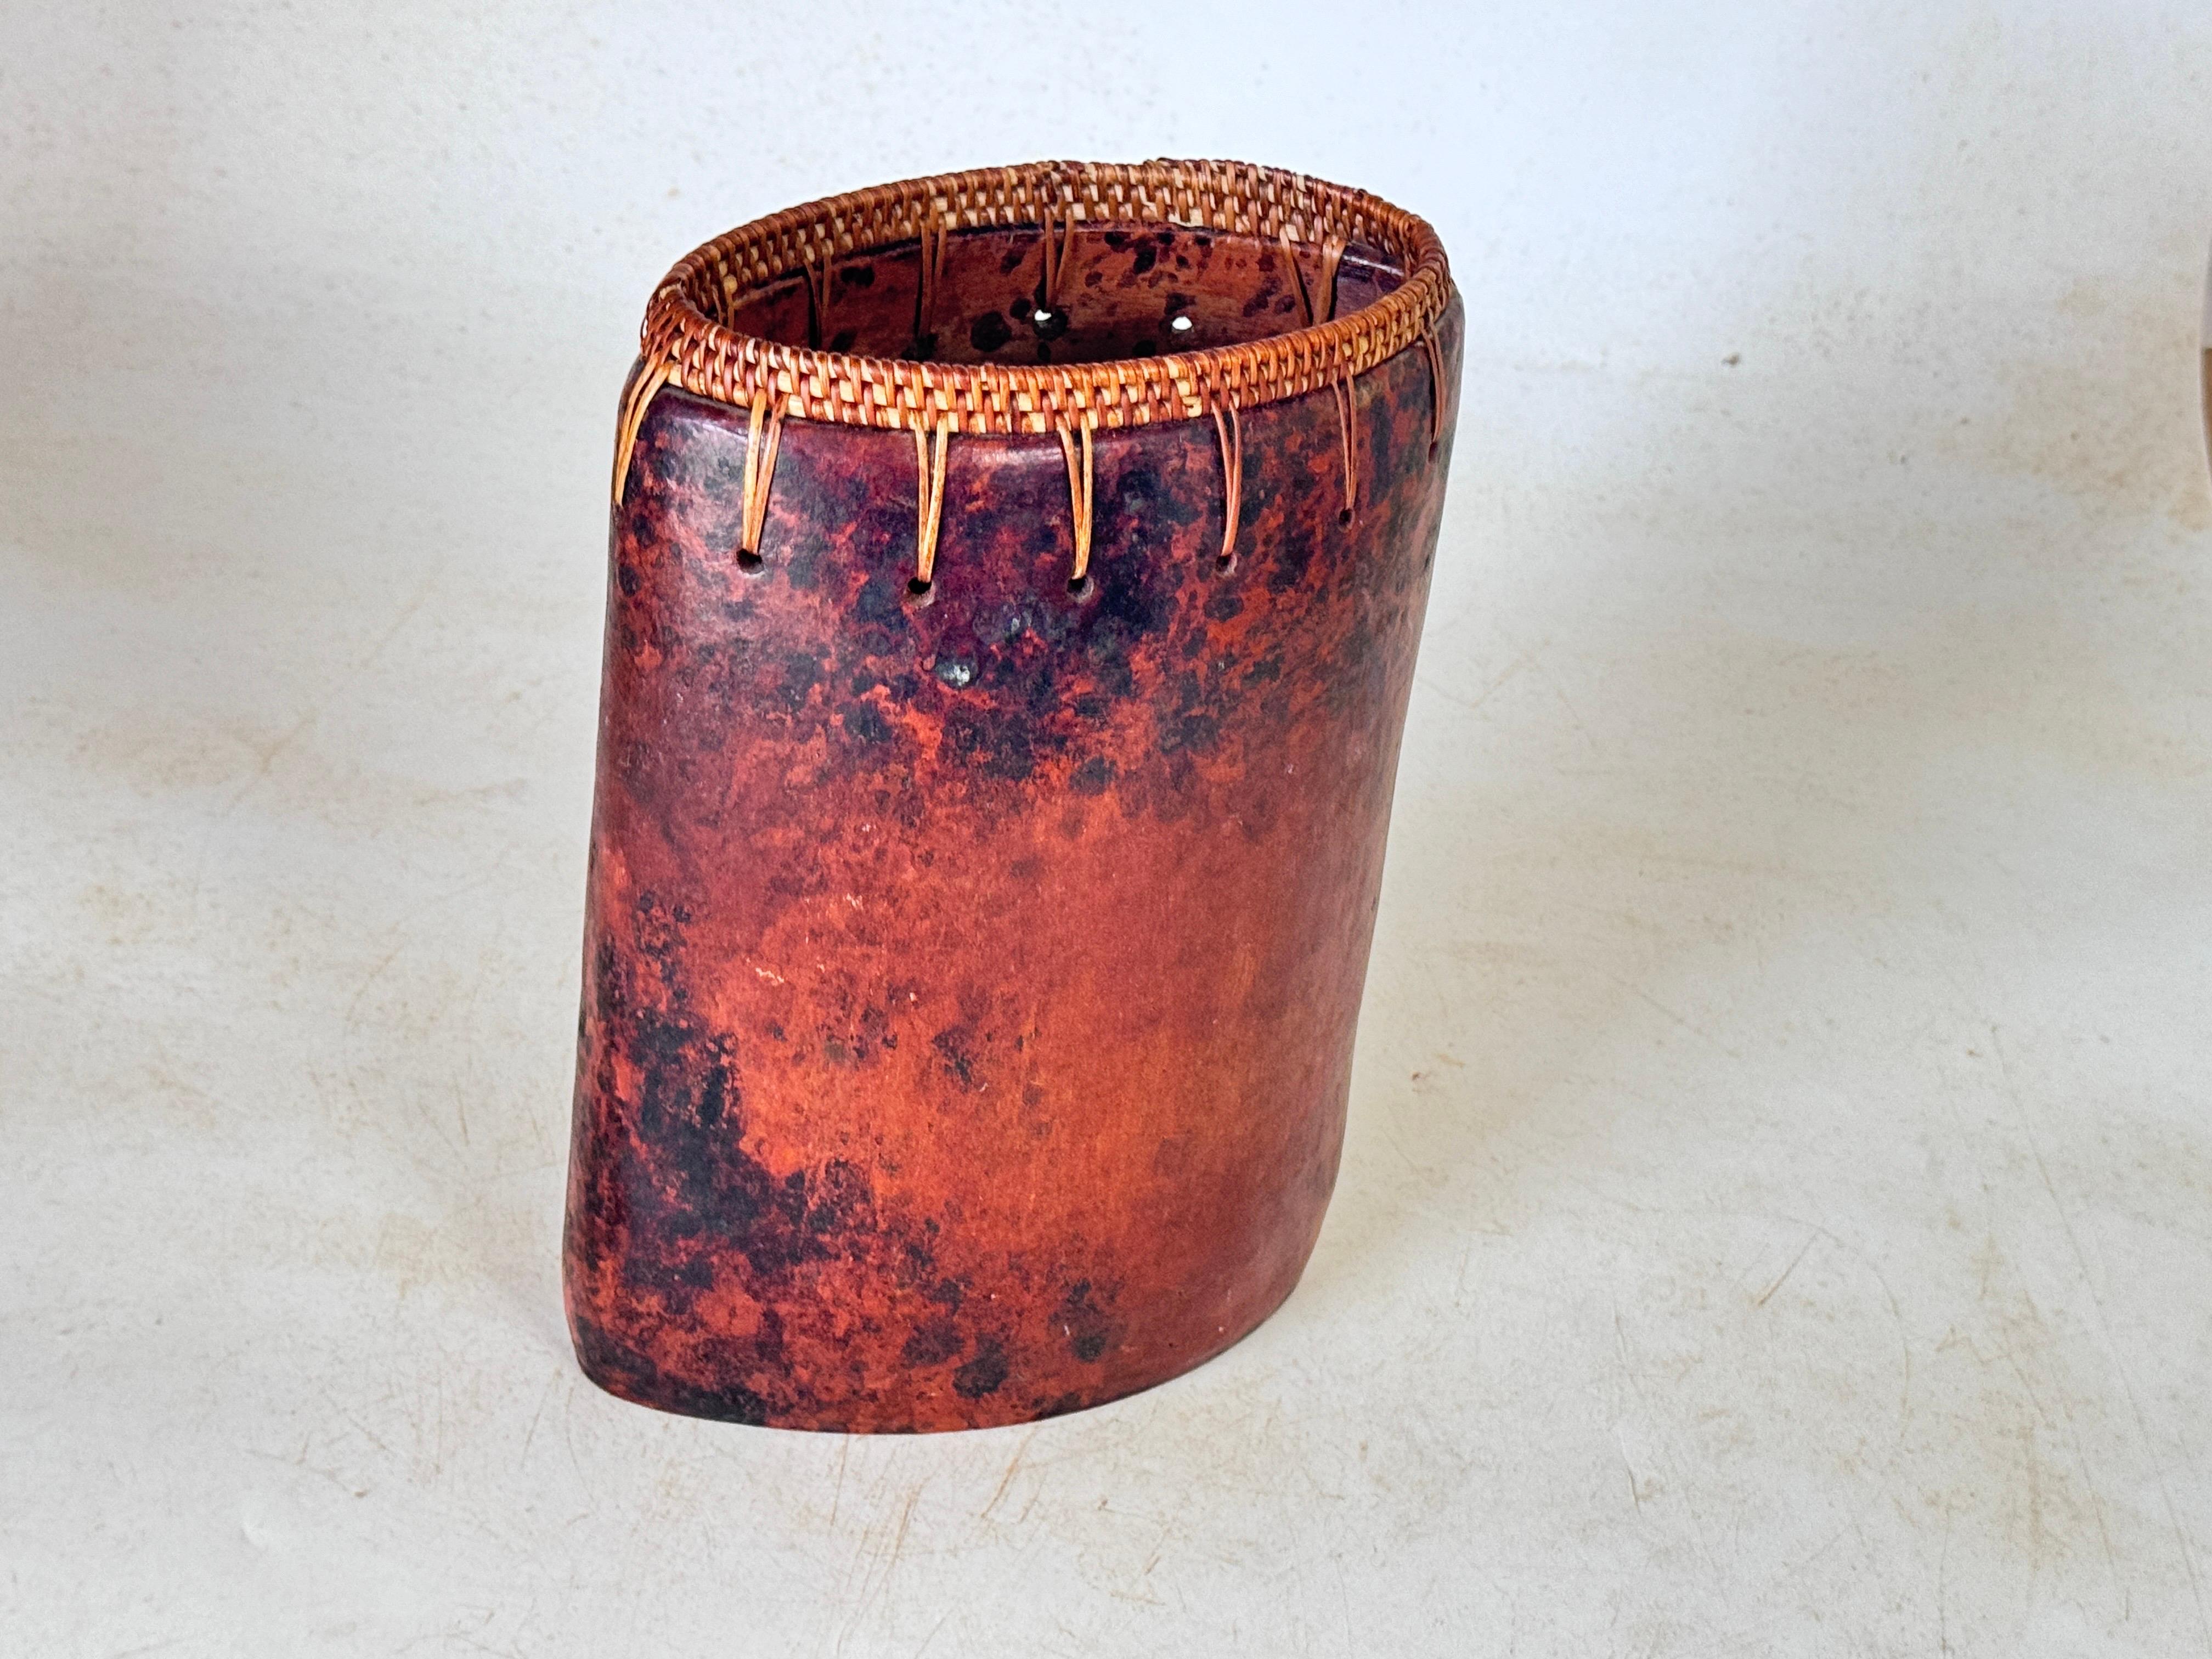 Decorative Box or Vase in Terracotta Africa 20th Century Brown Color.